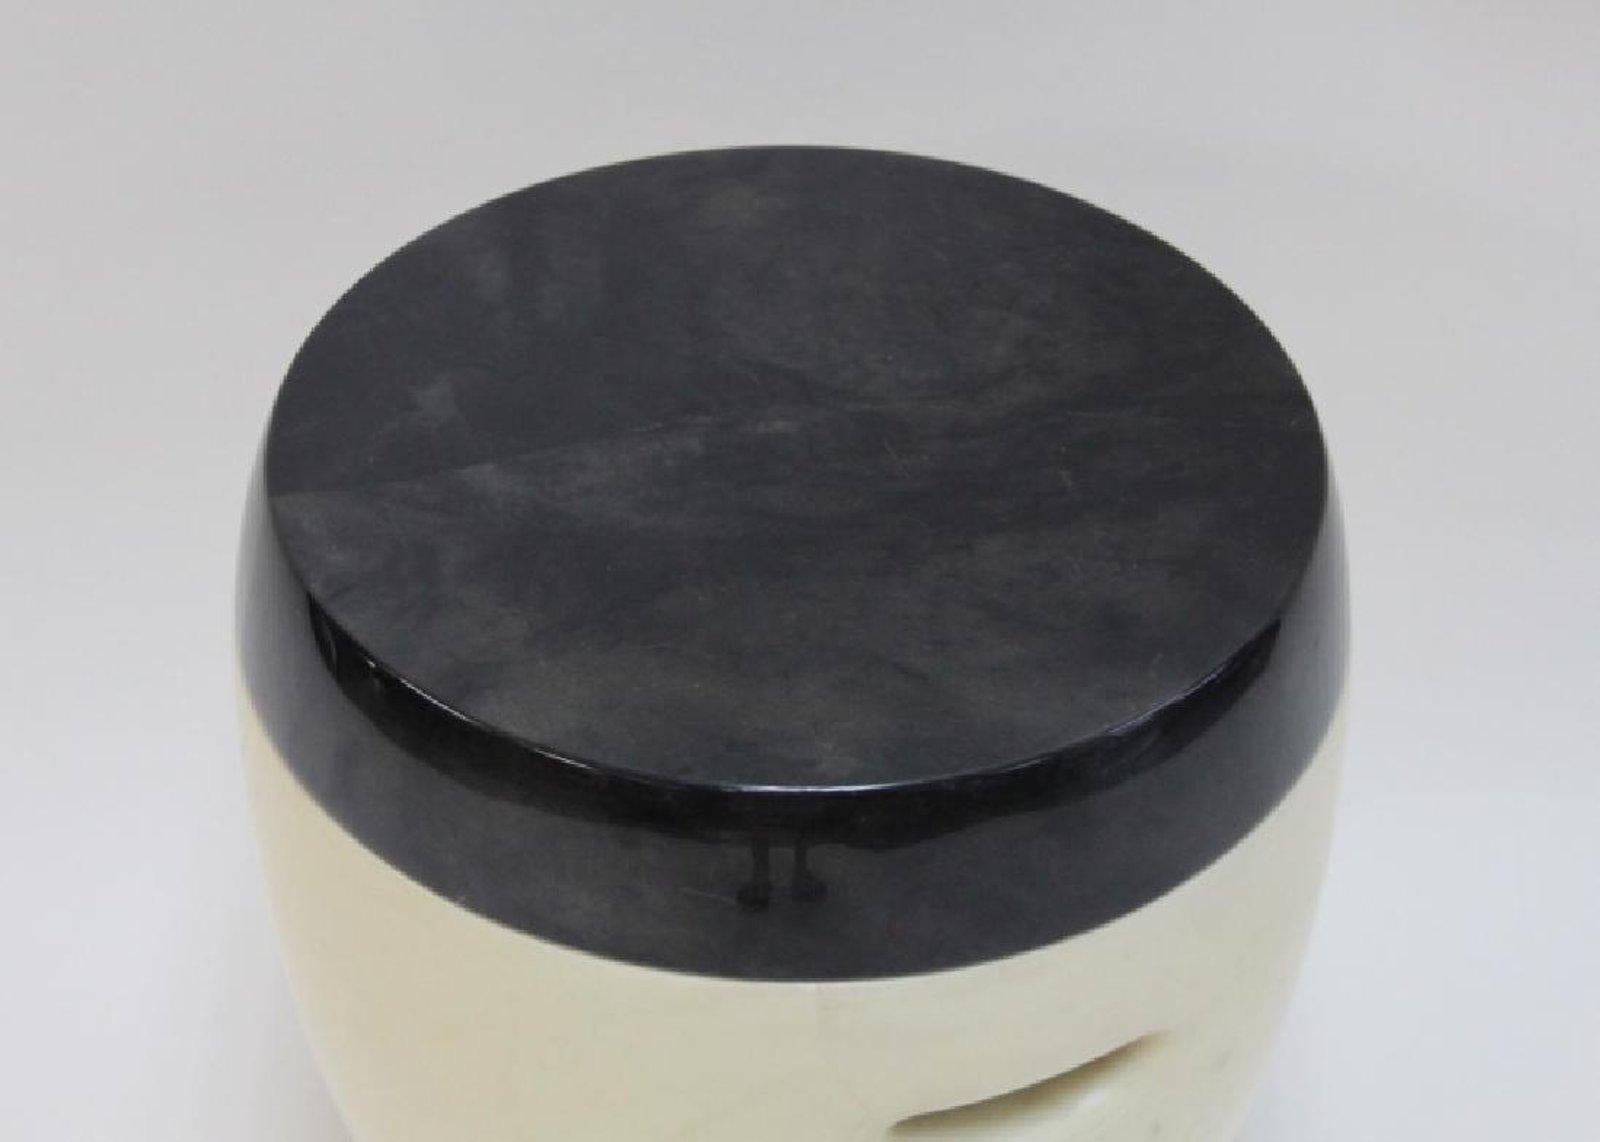 Fine Aldo Tura espresso latte lacquered goatskin end table, circa 1960s

Tura is one of those Italian 20th century designers known for their dedication to a specific material. Tura focused almost exclusively on lacquered goatskin, applying it to